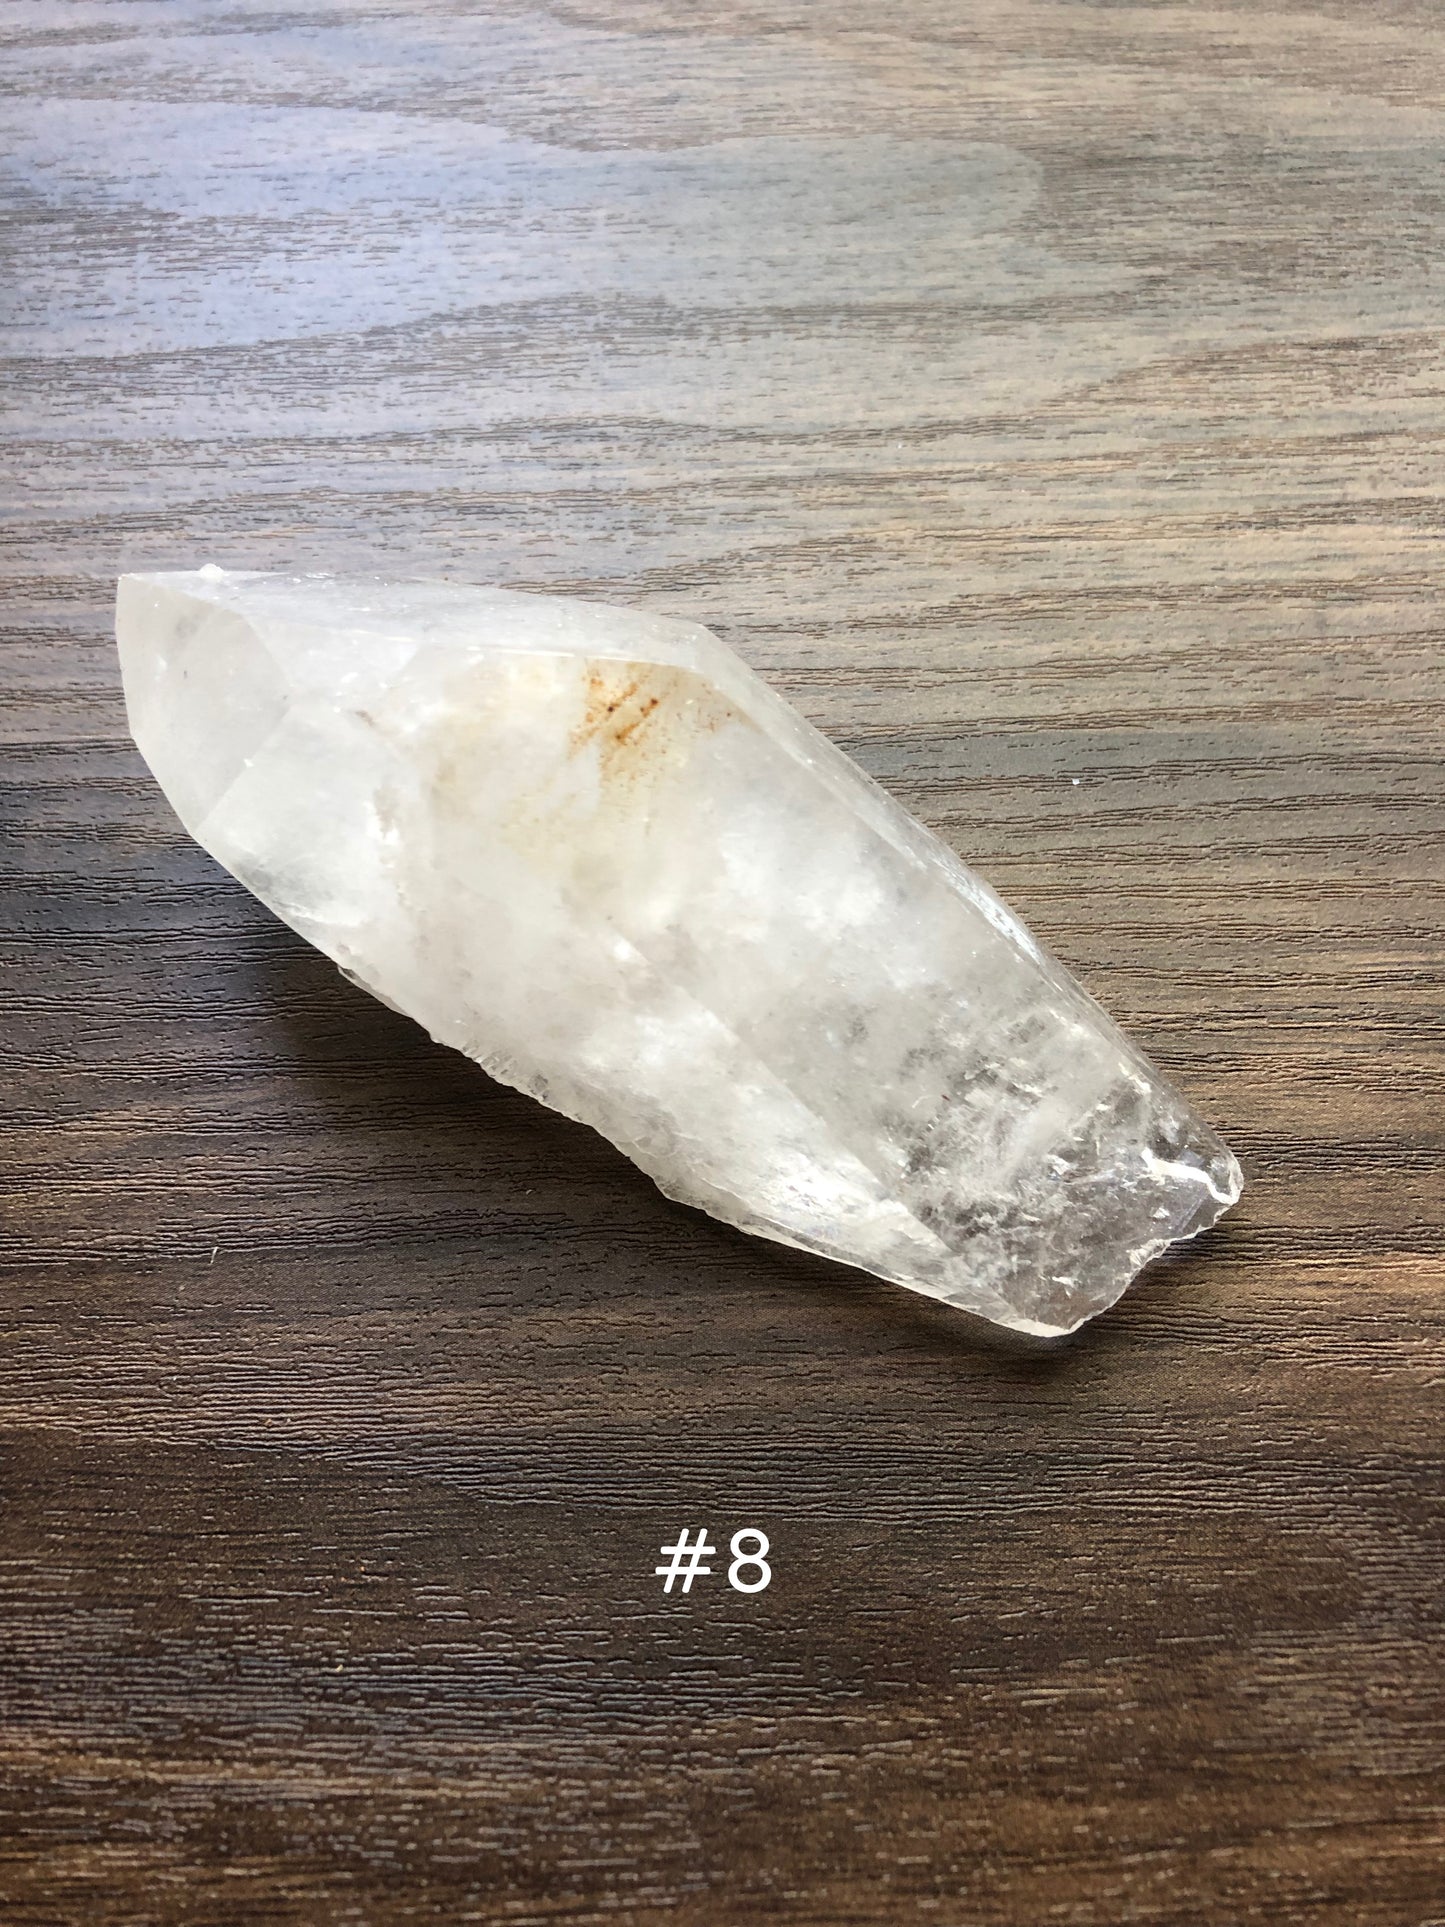 A large, rough cut quartz crystal rests on a wooden surface. It comes to a fine point, and is relatively flat.  The crystal is relatively clear, with a small dark spot on it. The number 8 is shown on the picture.